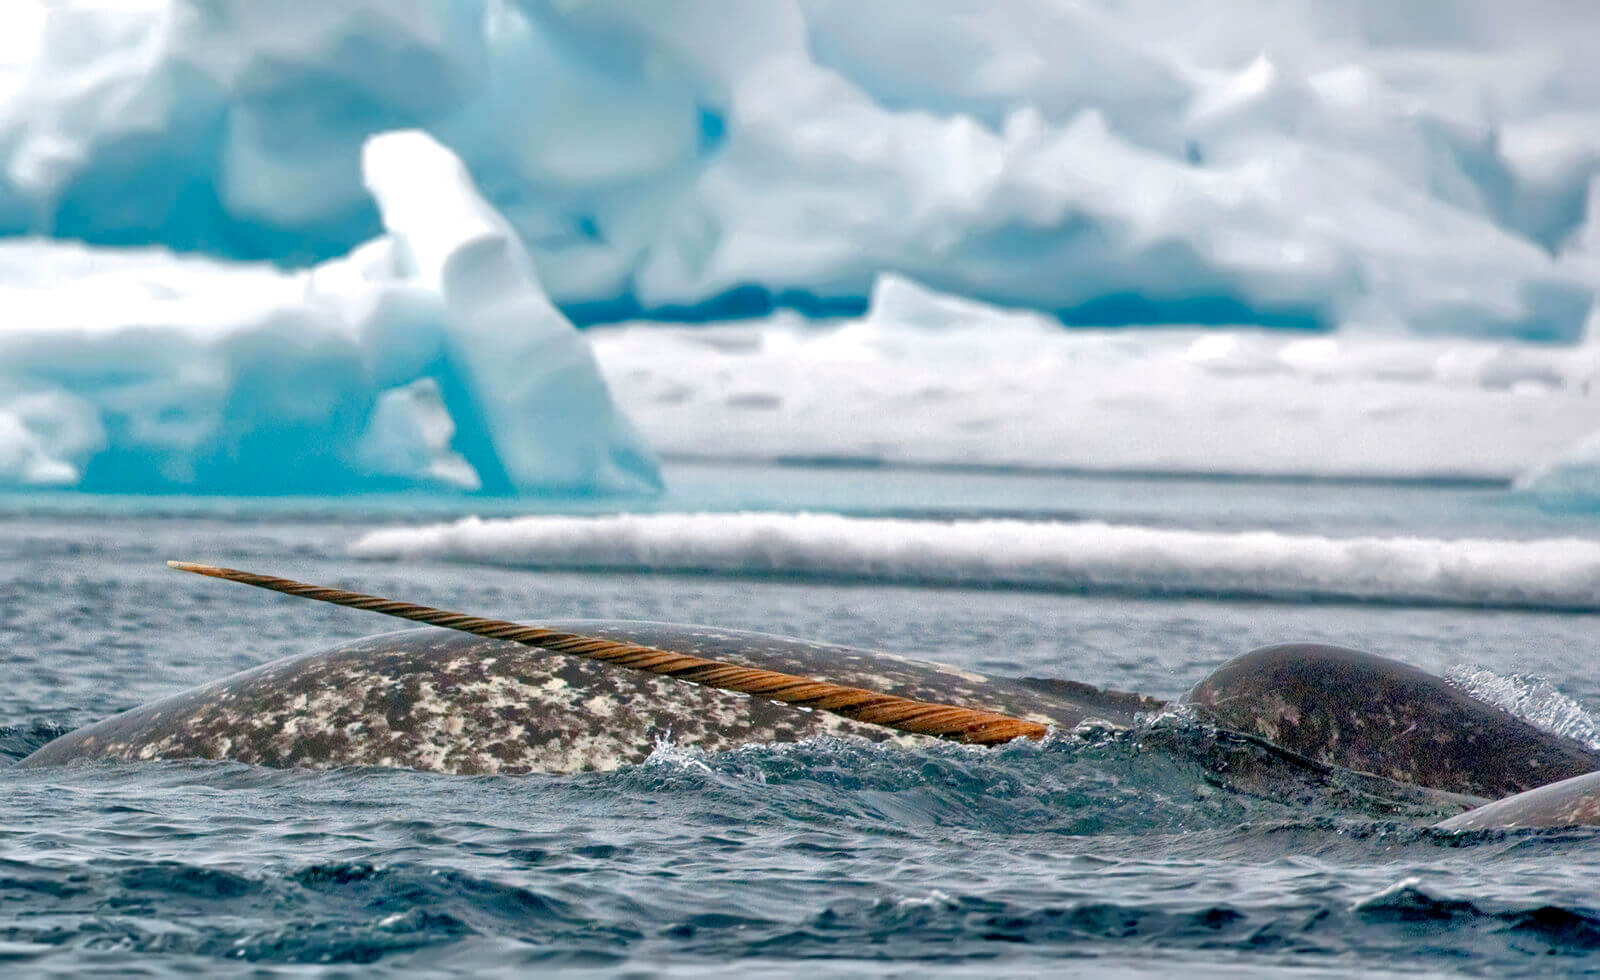 Narwhal whales in a break in the ice